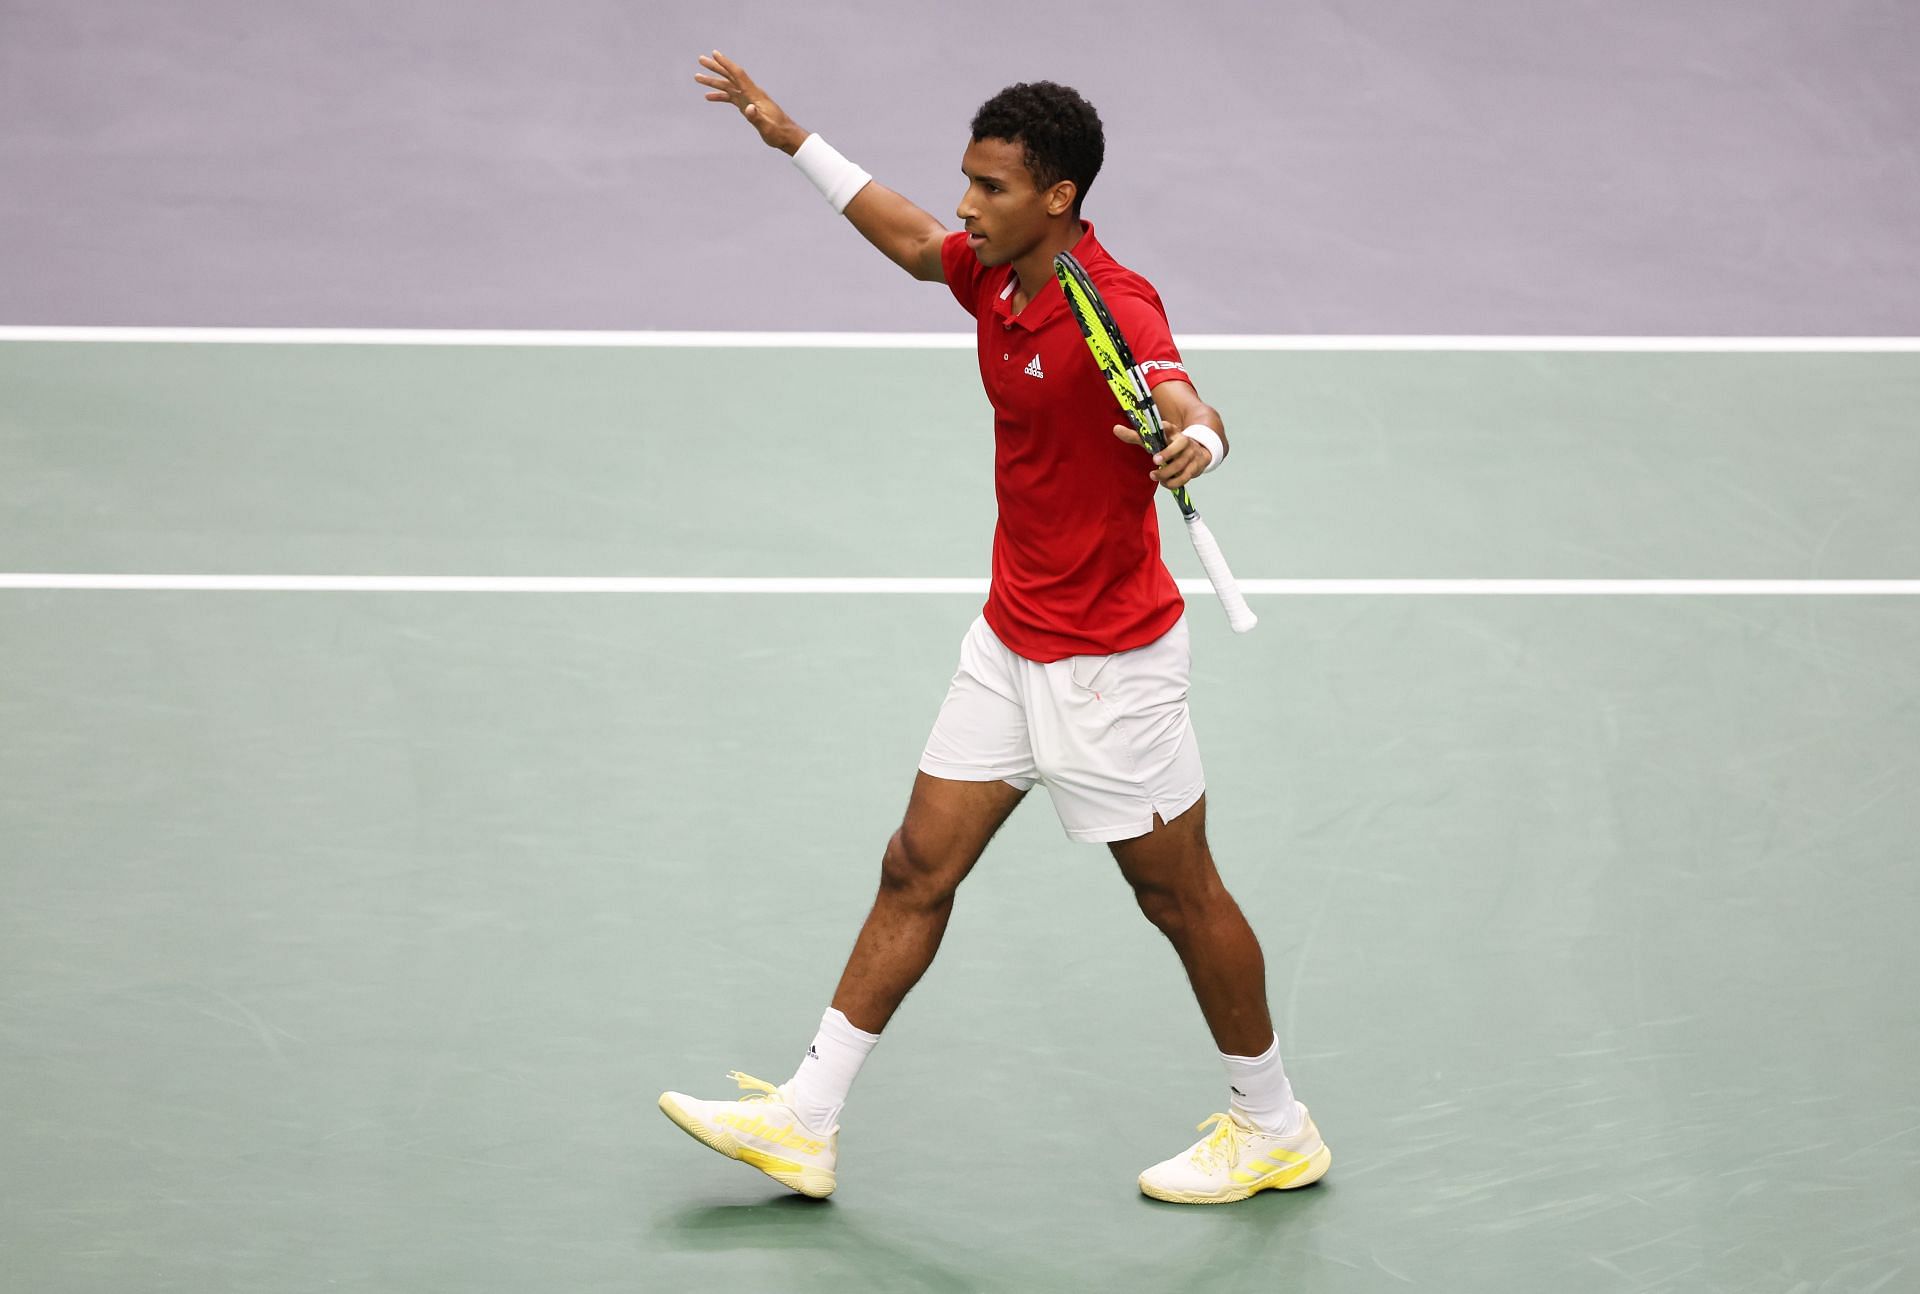 Felix Auger-Aliassime at the 2022 Davis Cup.